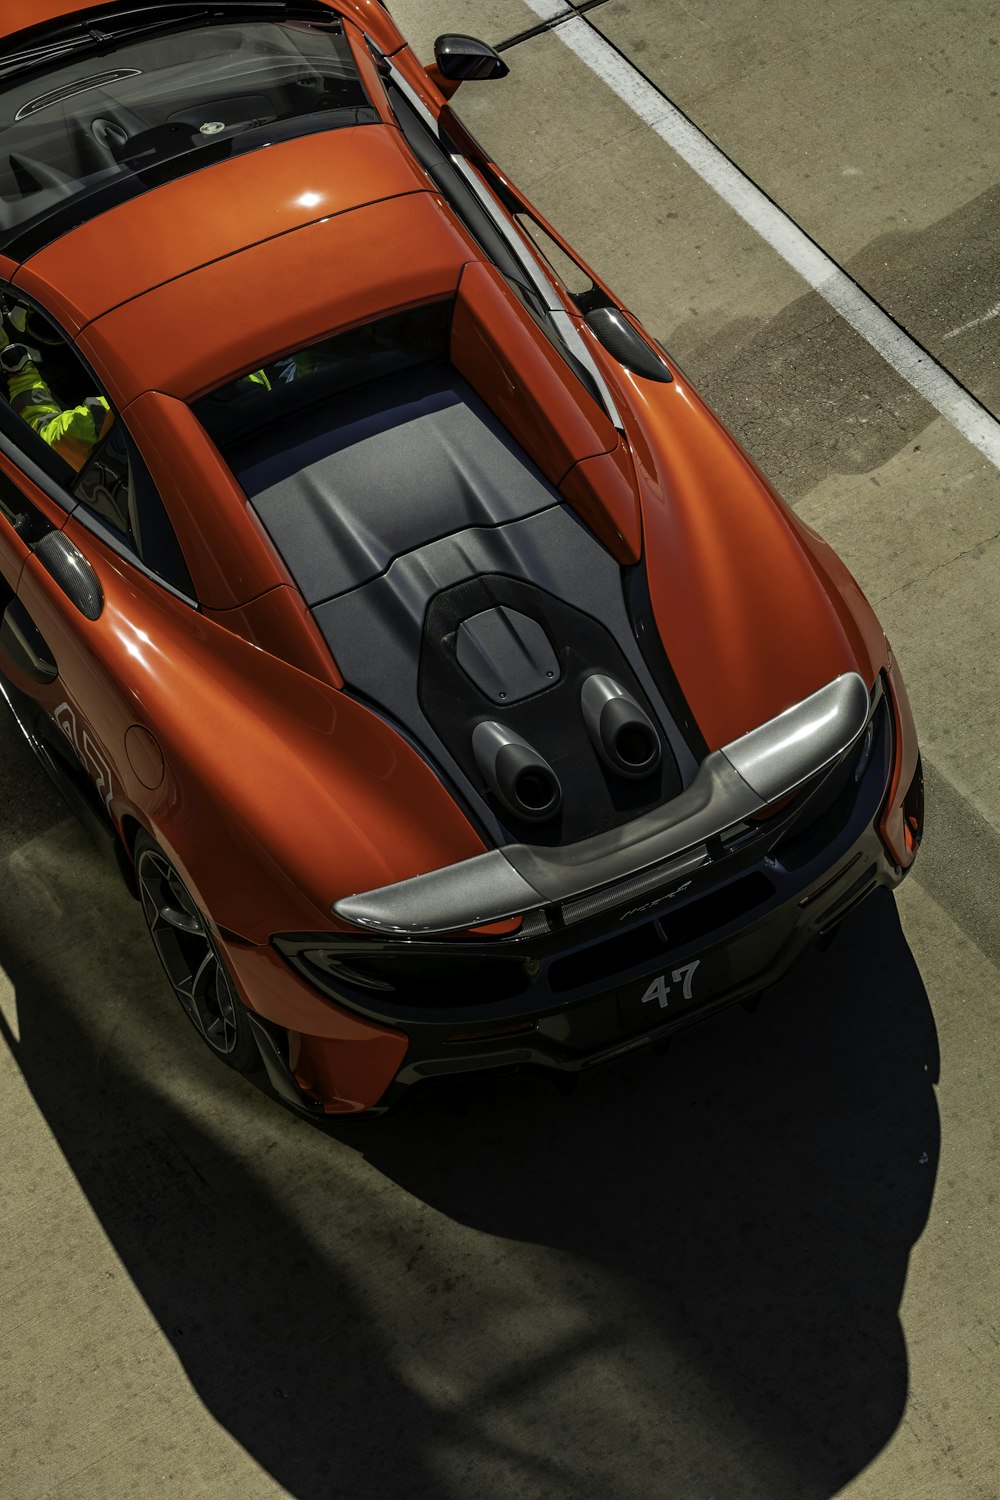 an orange sports car is shown from above